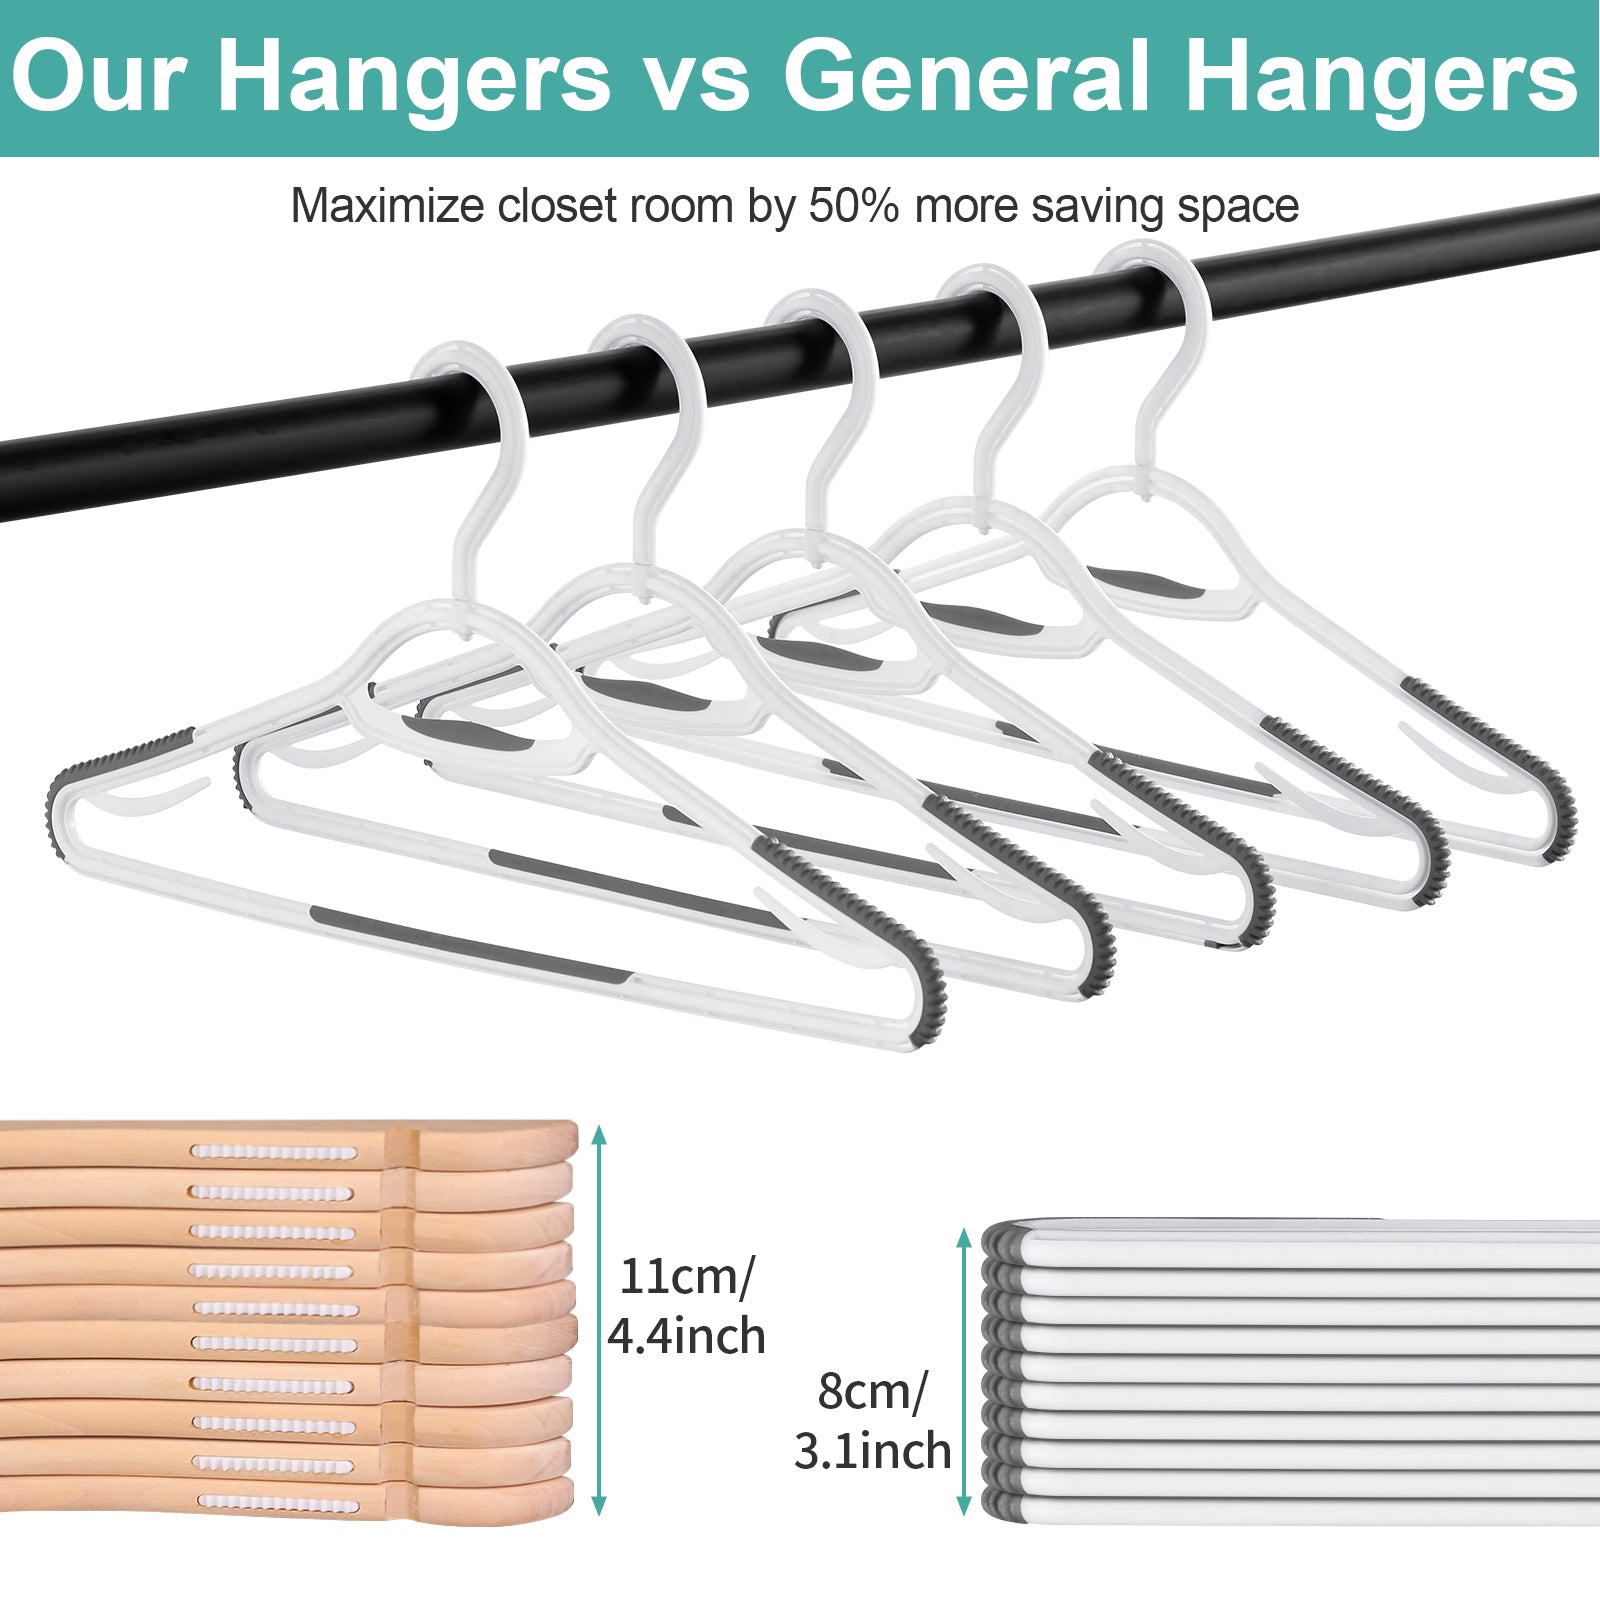 How to Pack Hangers to Maximize Space